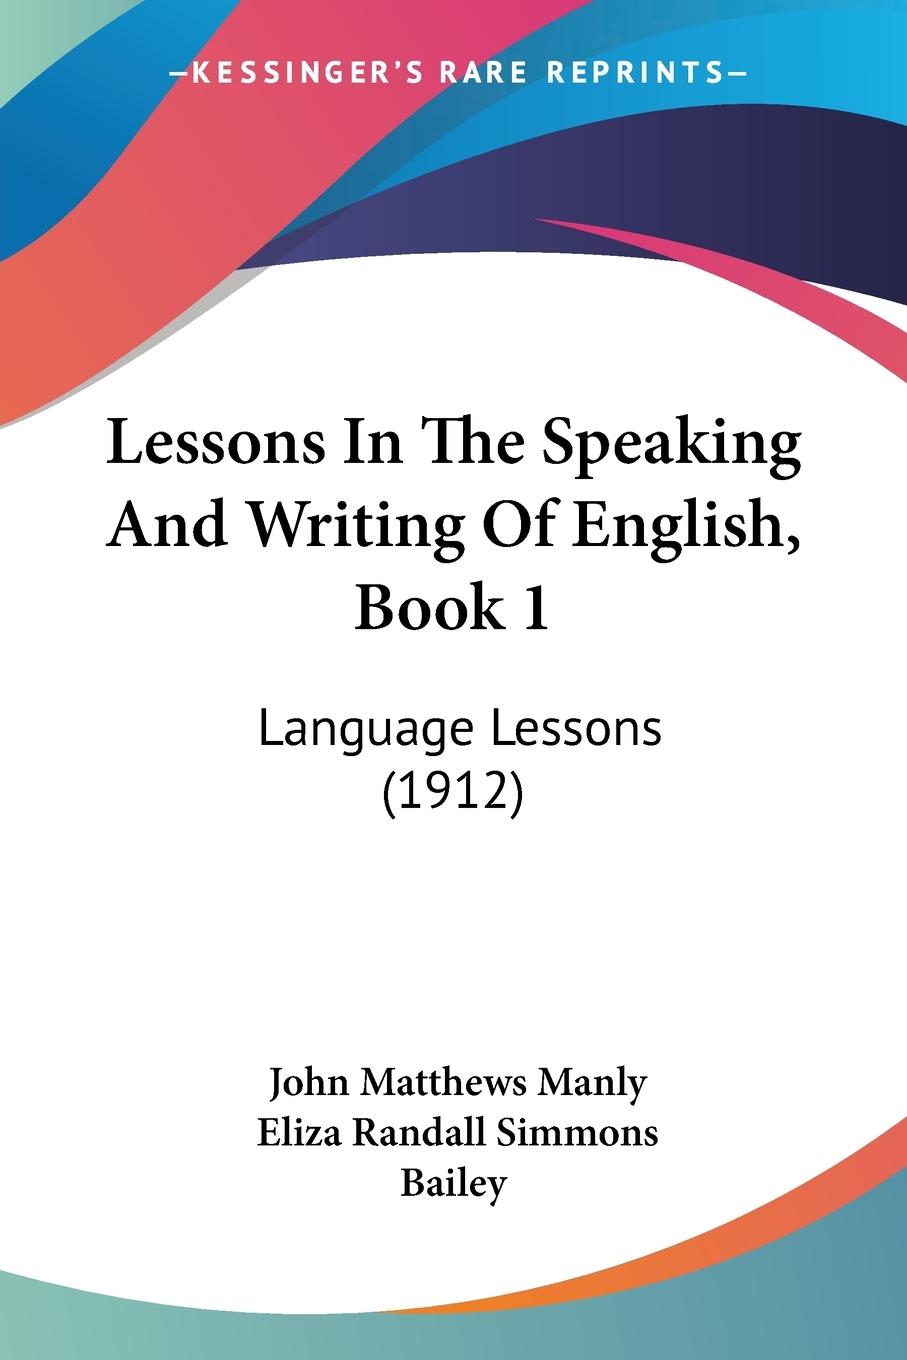 Lessons In The Speaking And Writing Of English, Book 1 - Manly, John Matthews Bailey, Eliza Randall Simmons